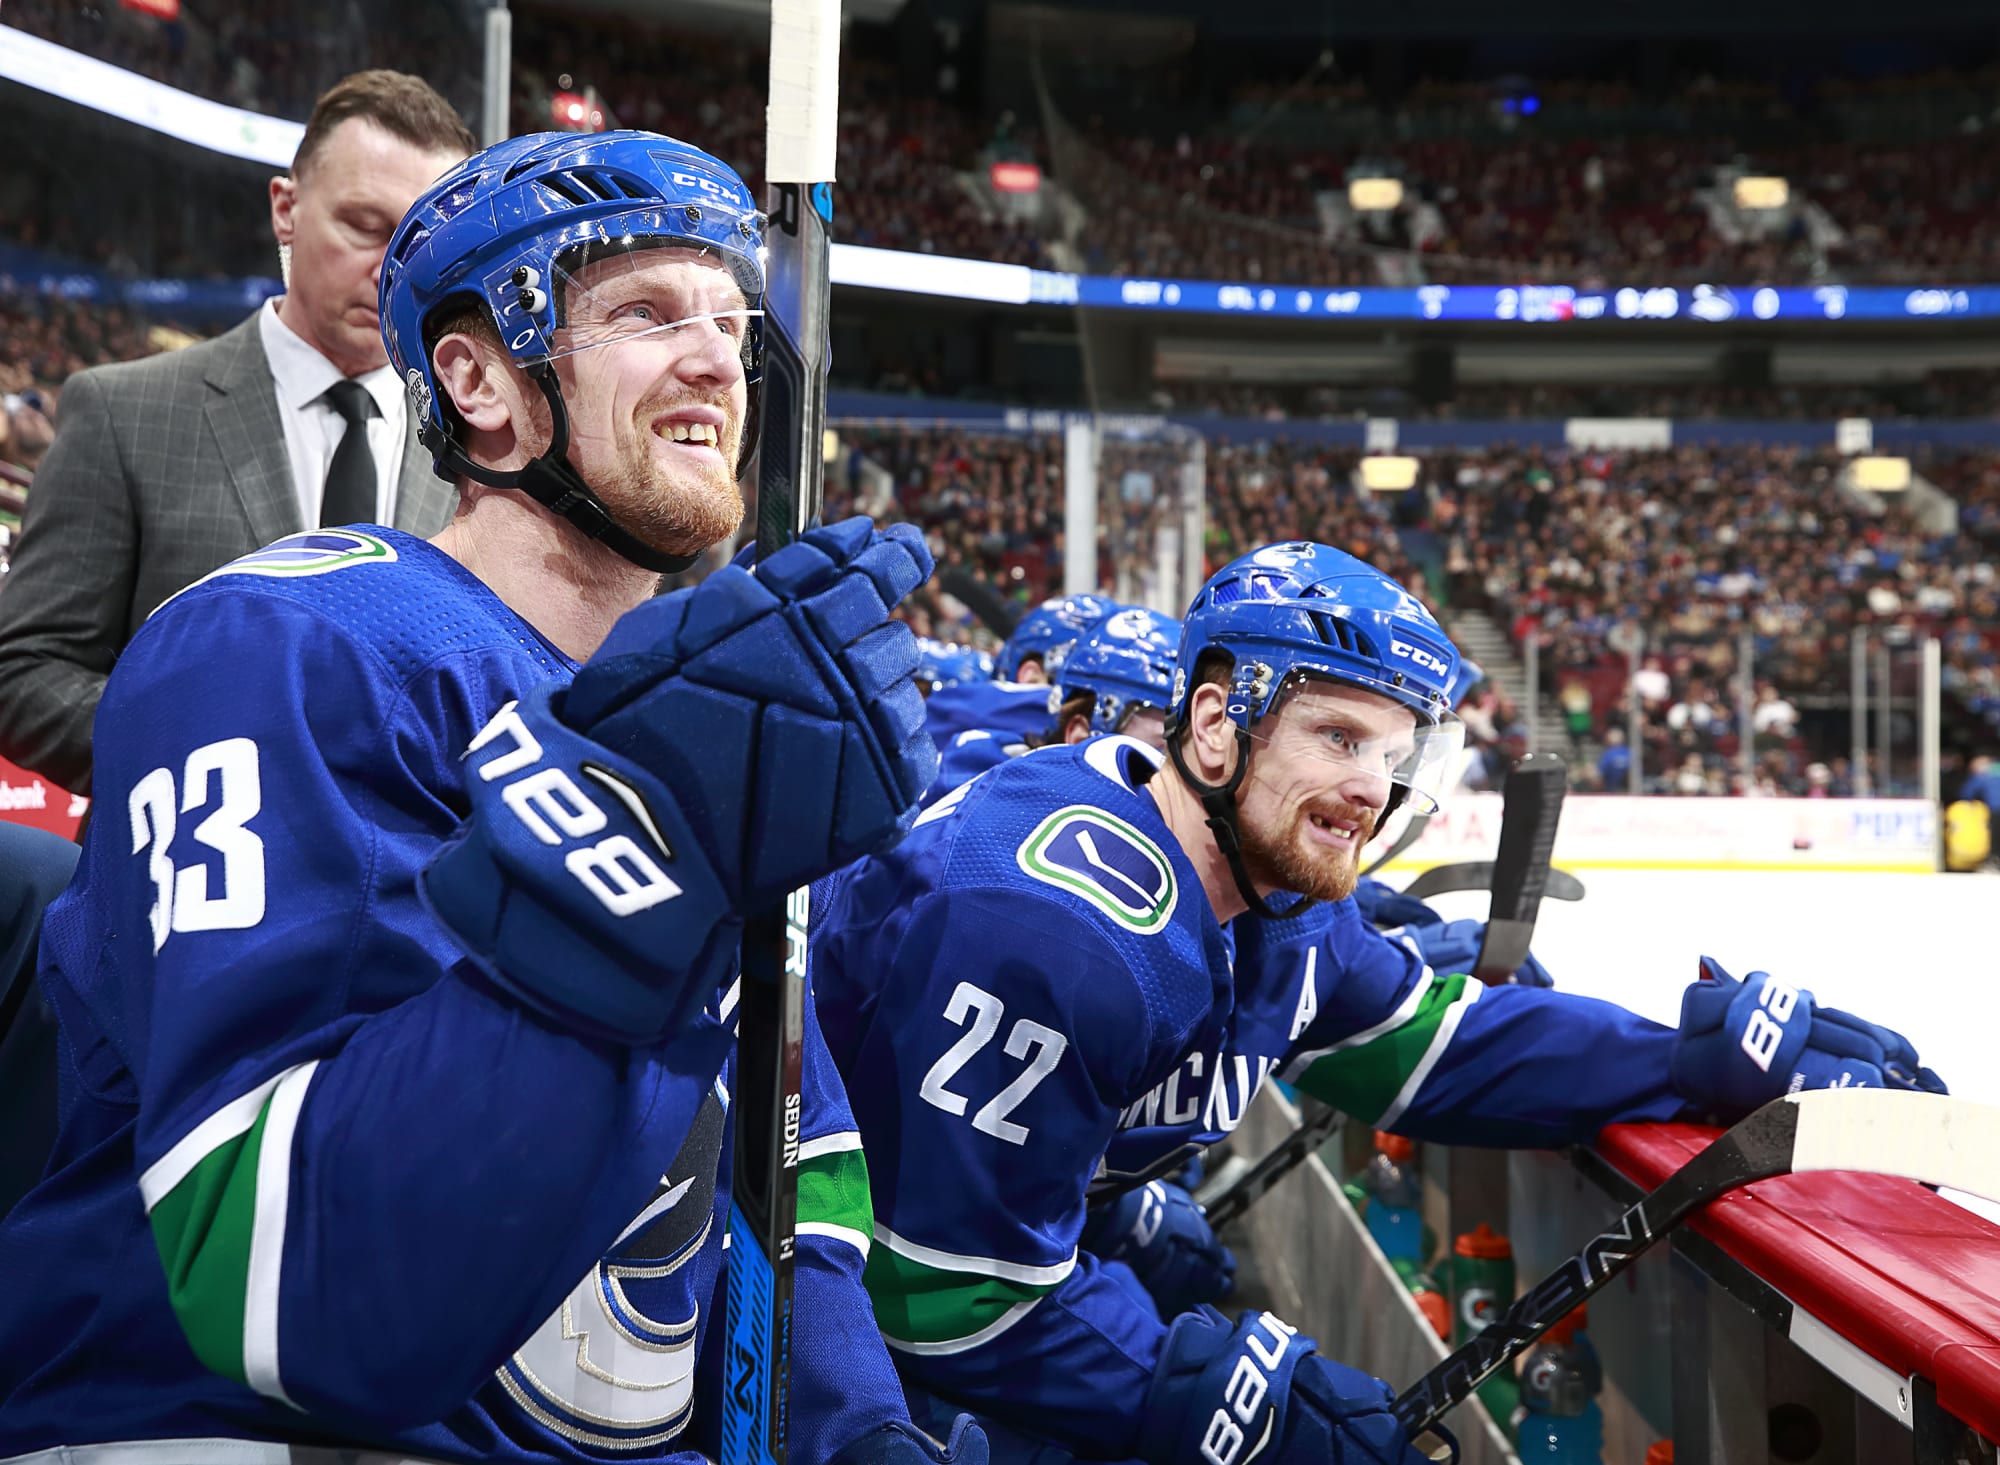 Speed Skate: The story behind the Vancouver Canucks' 'flying skate